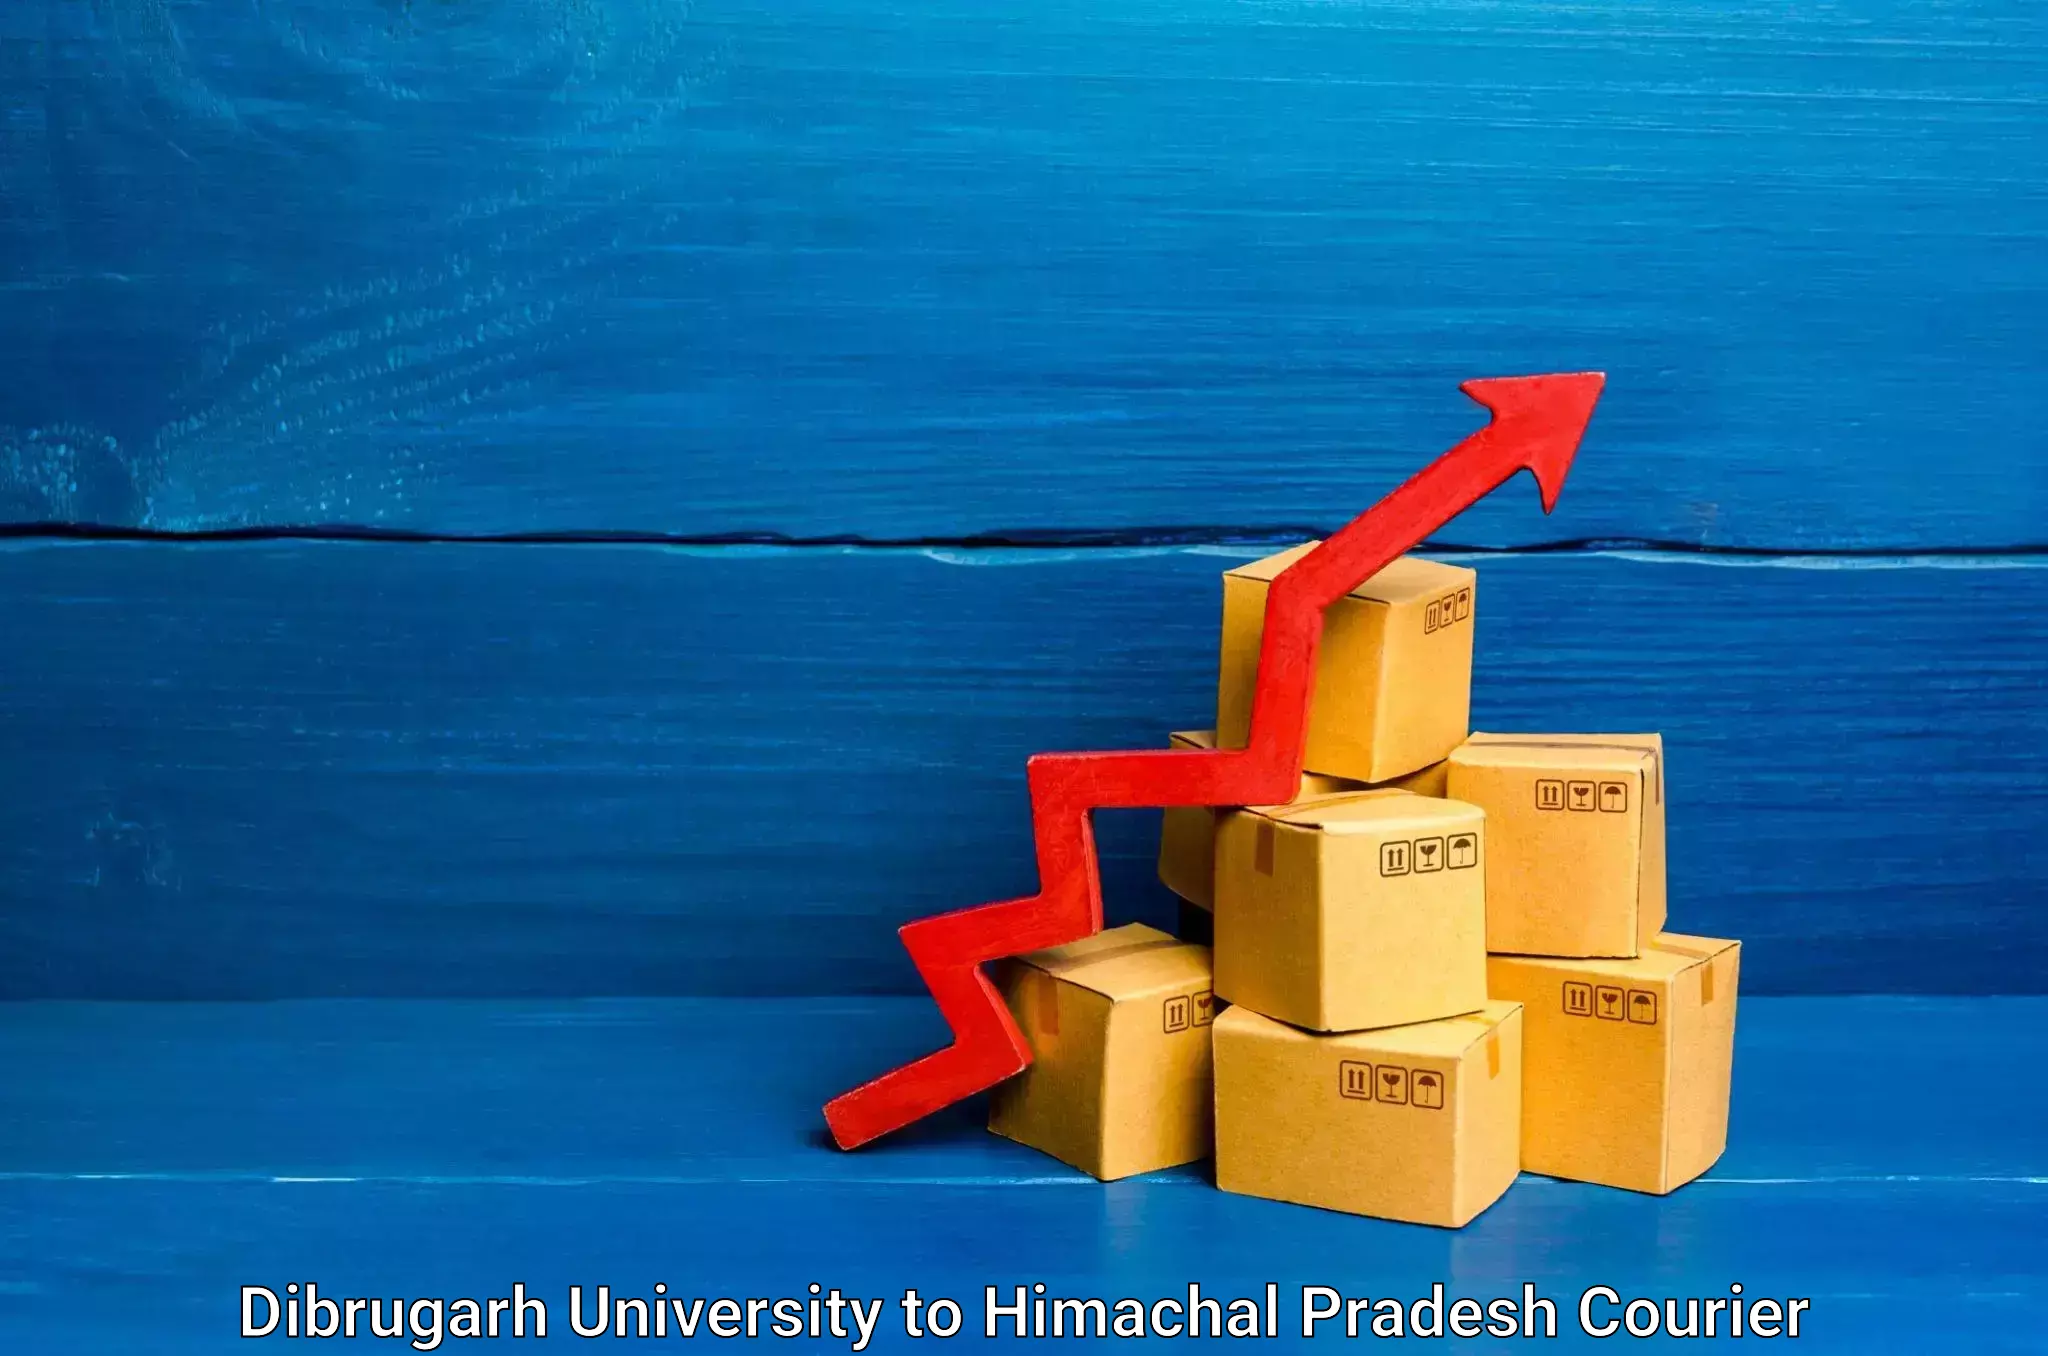 End-to-end delivery in Dibrugarh University to Solan